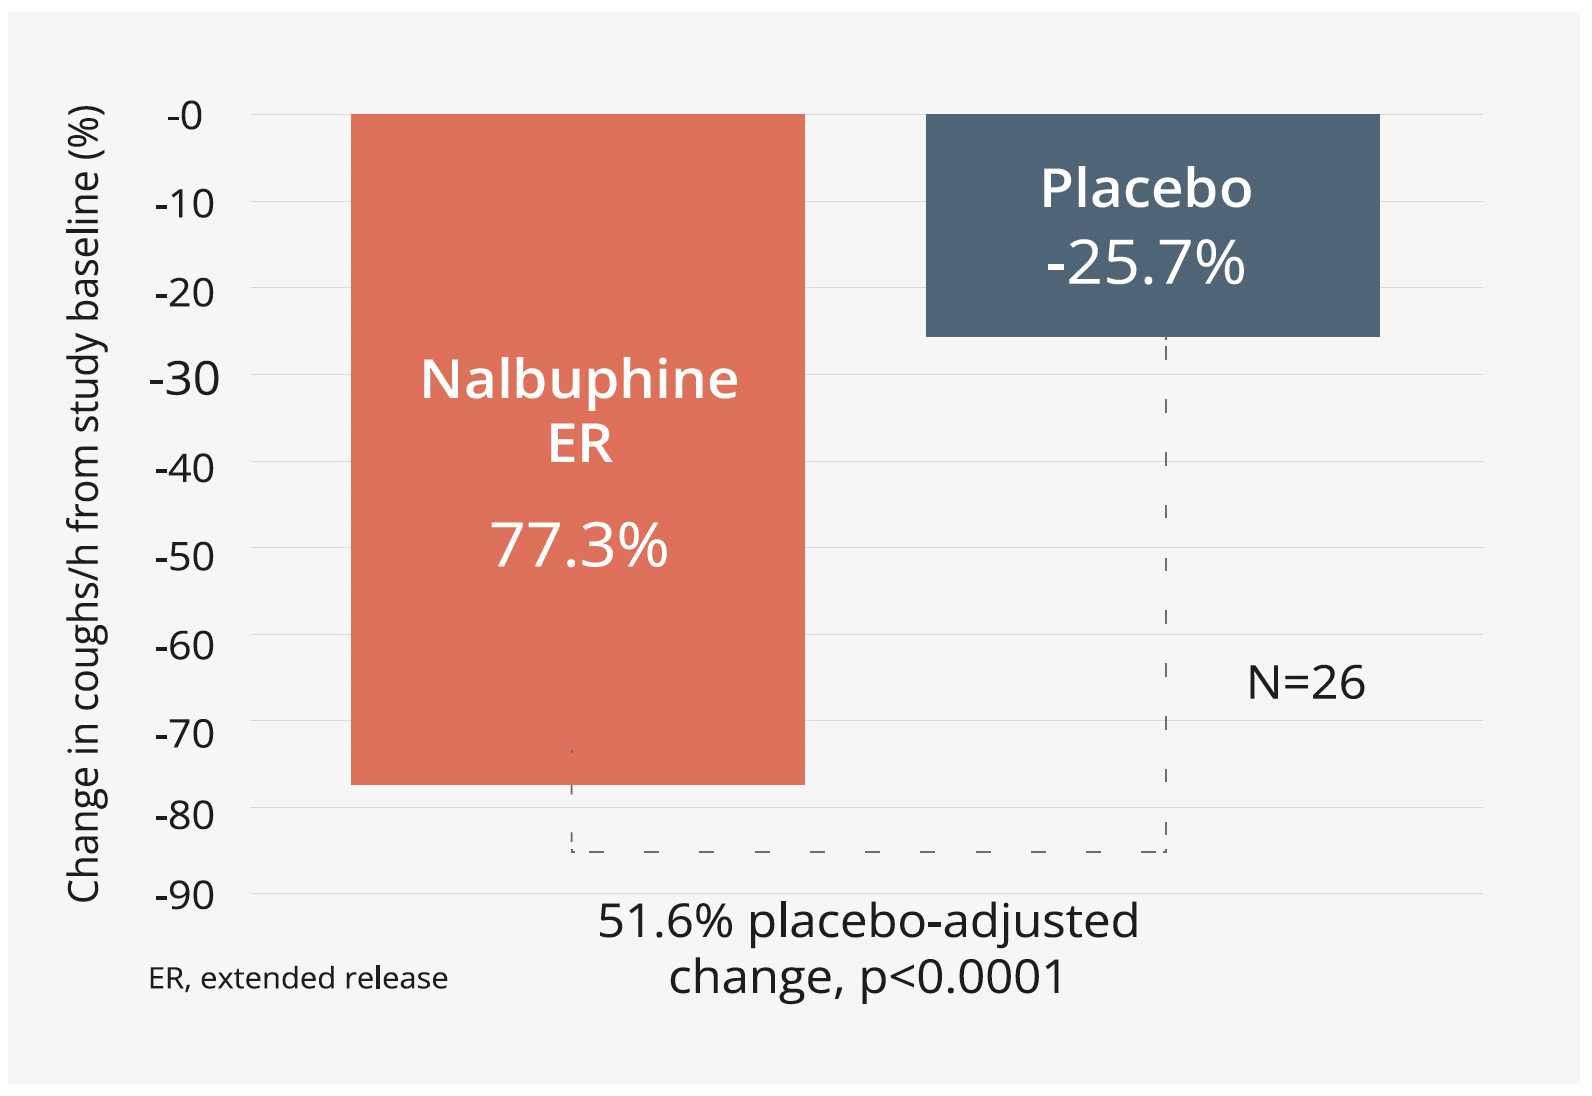 Nalbuphine significantly reduces daytime cough frequency compared with placebo in patients with interstitial pulmonary fibrosis (IPF)